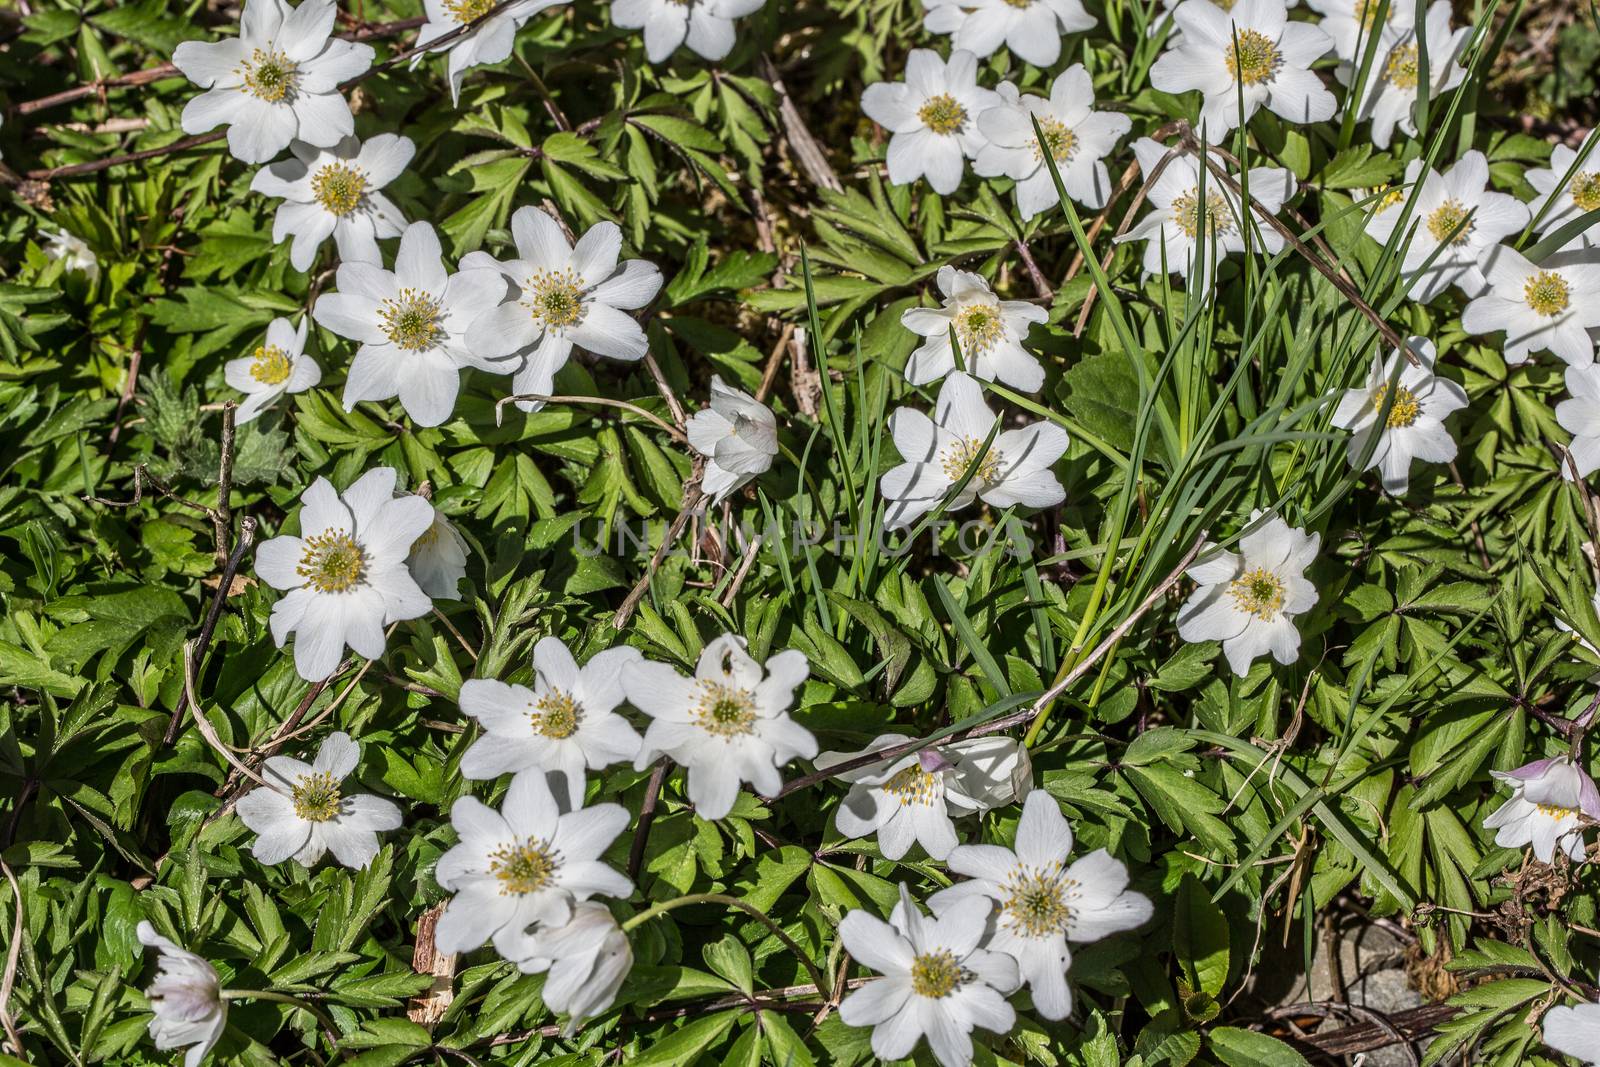 Forest anemone with white flowers on the side of the path